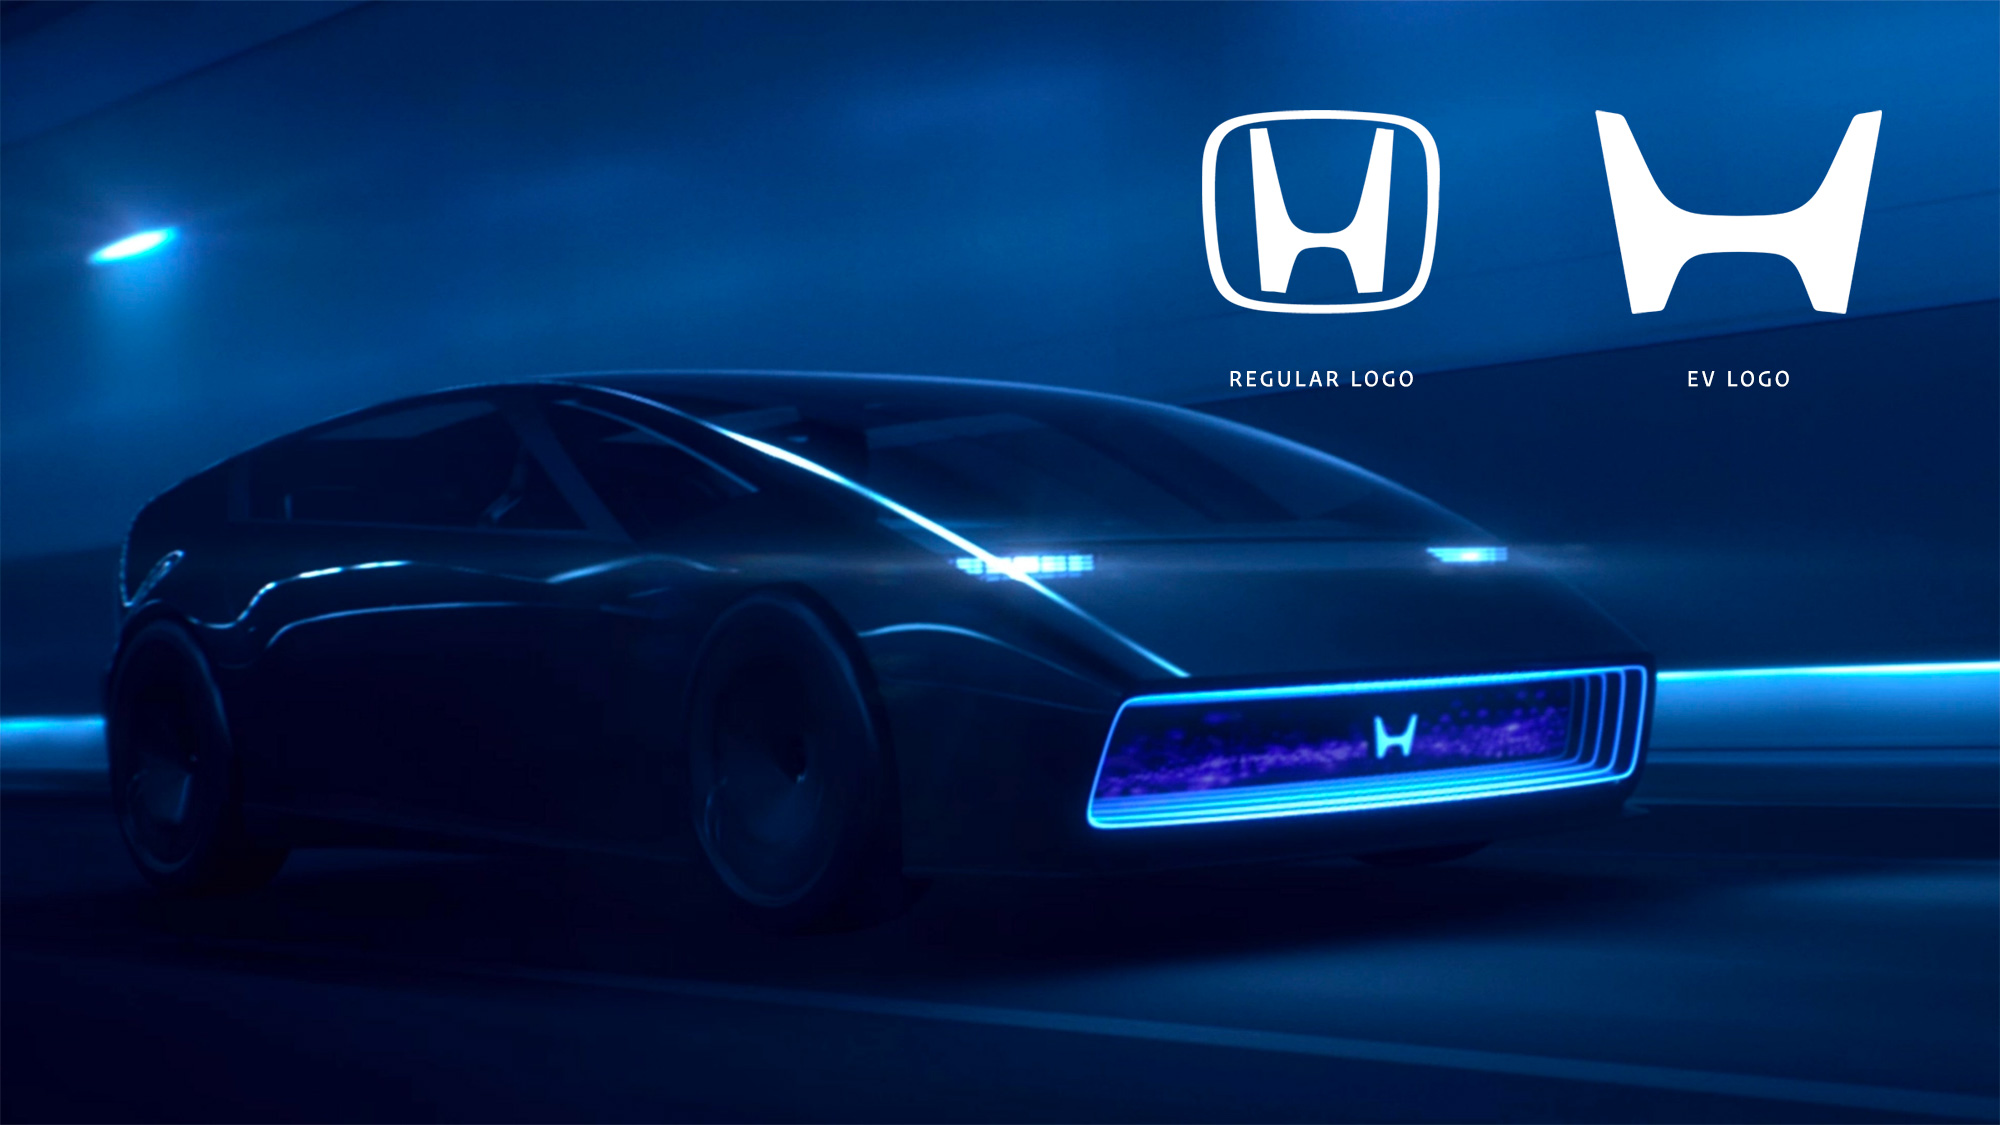 Two Honda Logos to Rule them All